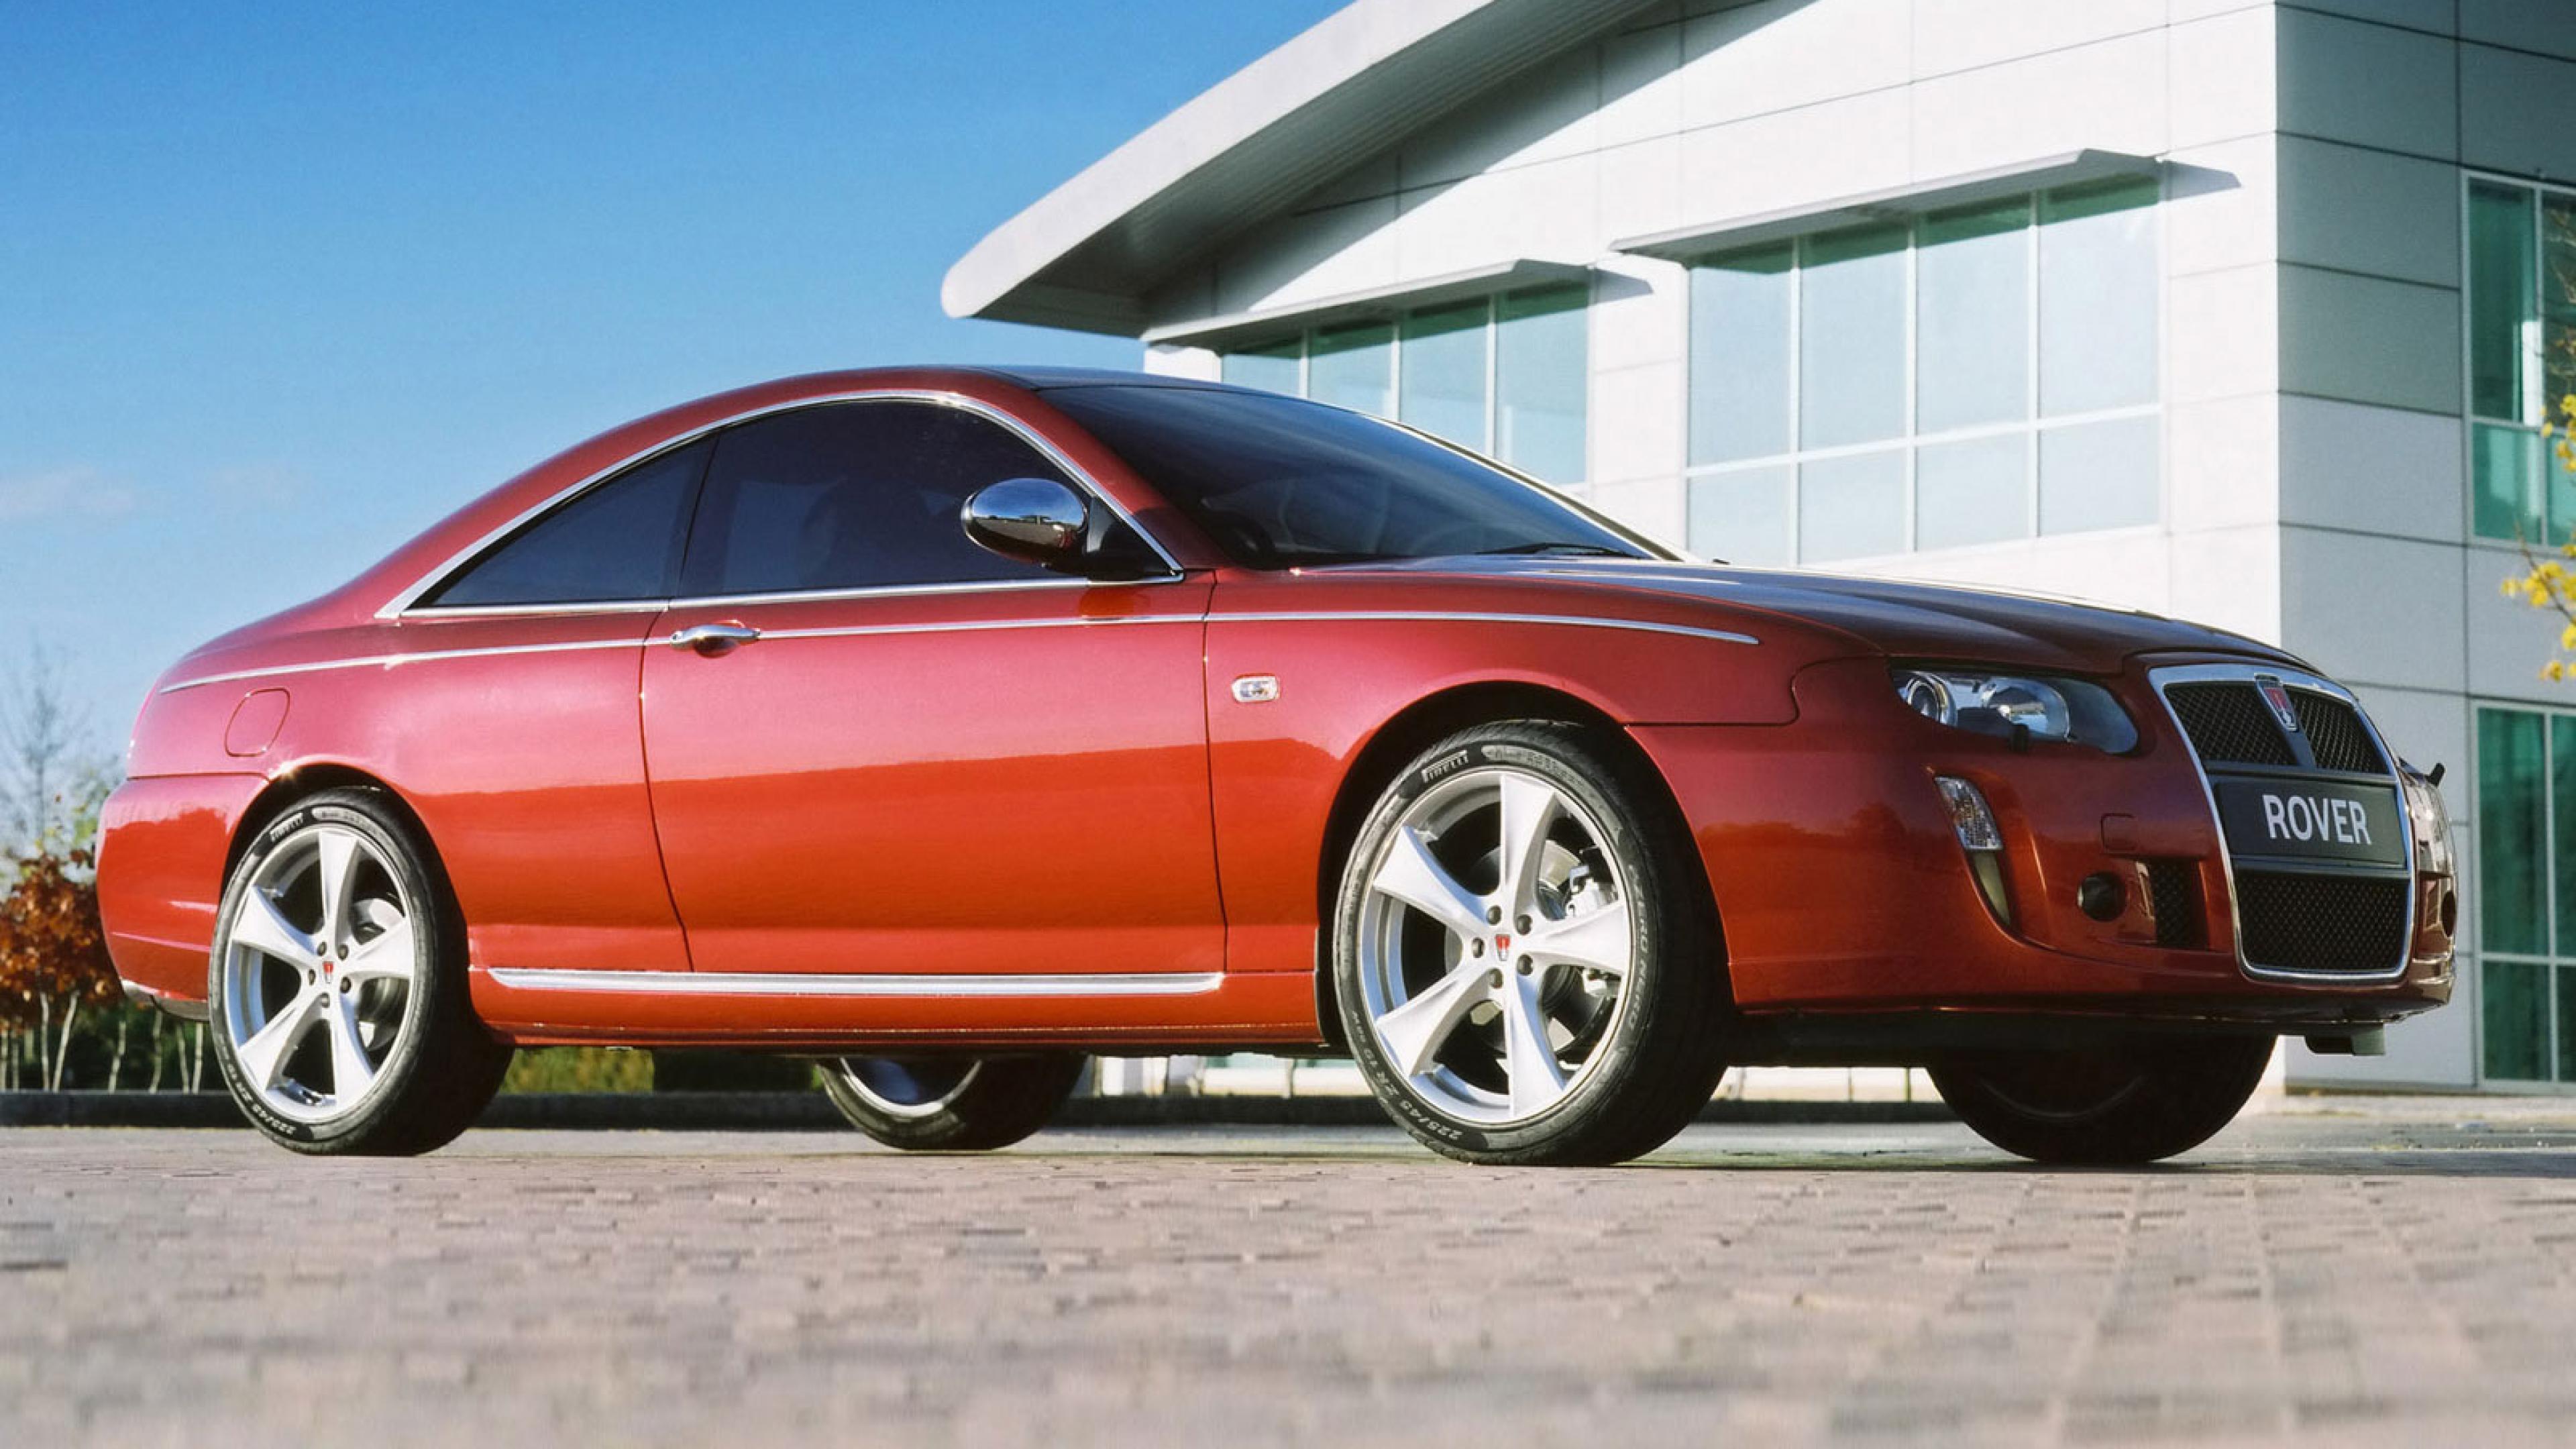 Wallpapers MG ZT coupe Rover on the desktop